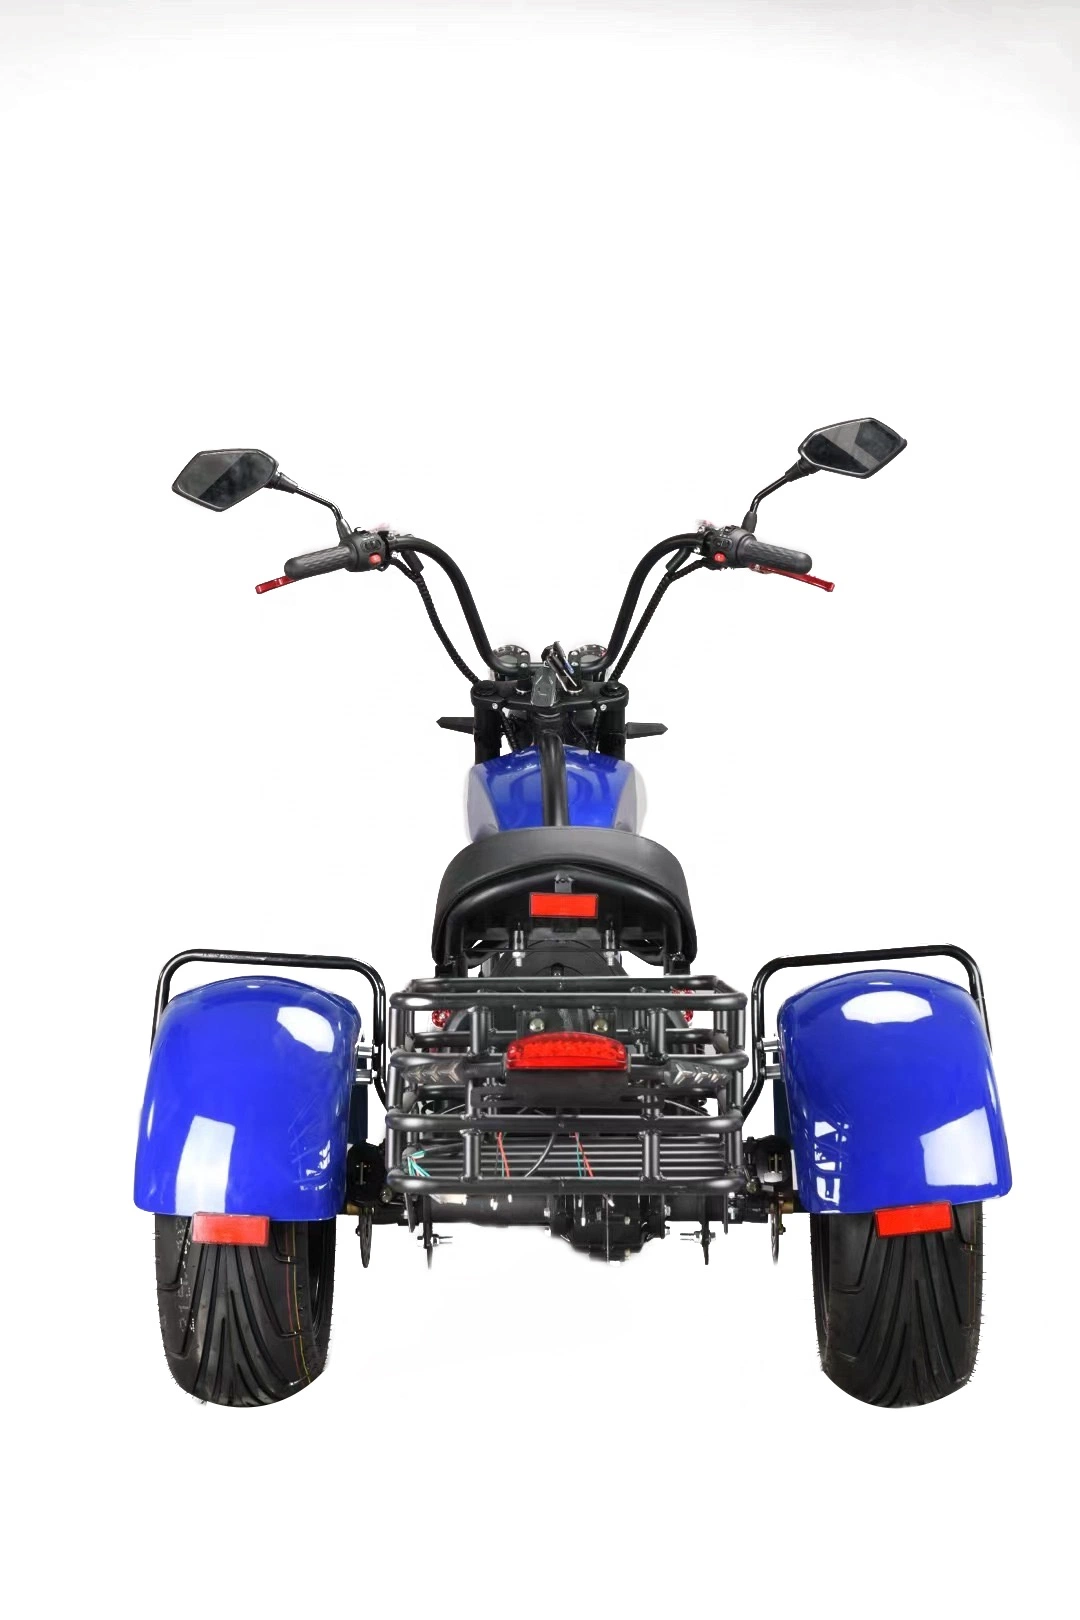 Hot Sale 2000W off Road Electric Motorcycle Scooter Citycoco Adult Elektro Scooter 3 Wheel Fat Fire with EEC/Coc